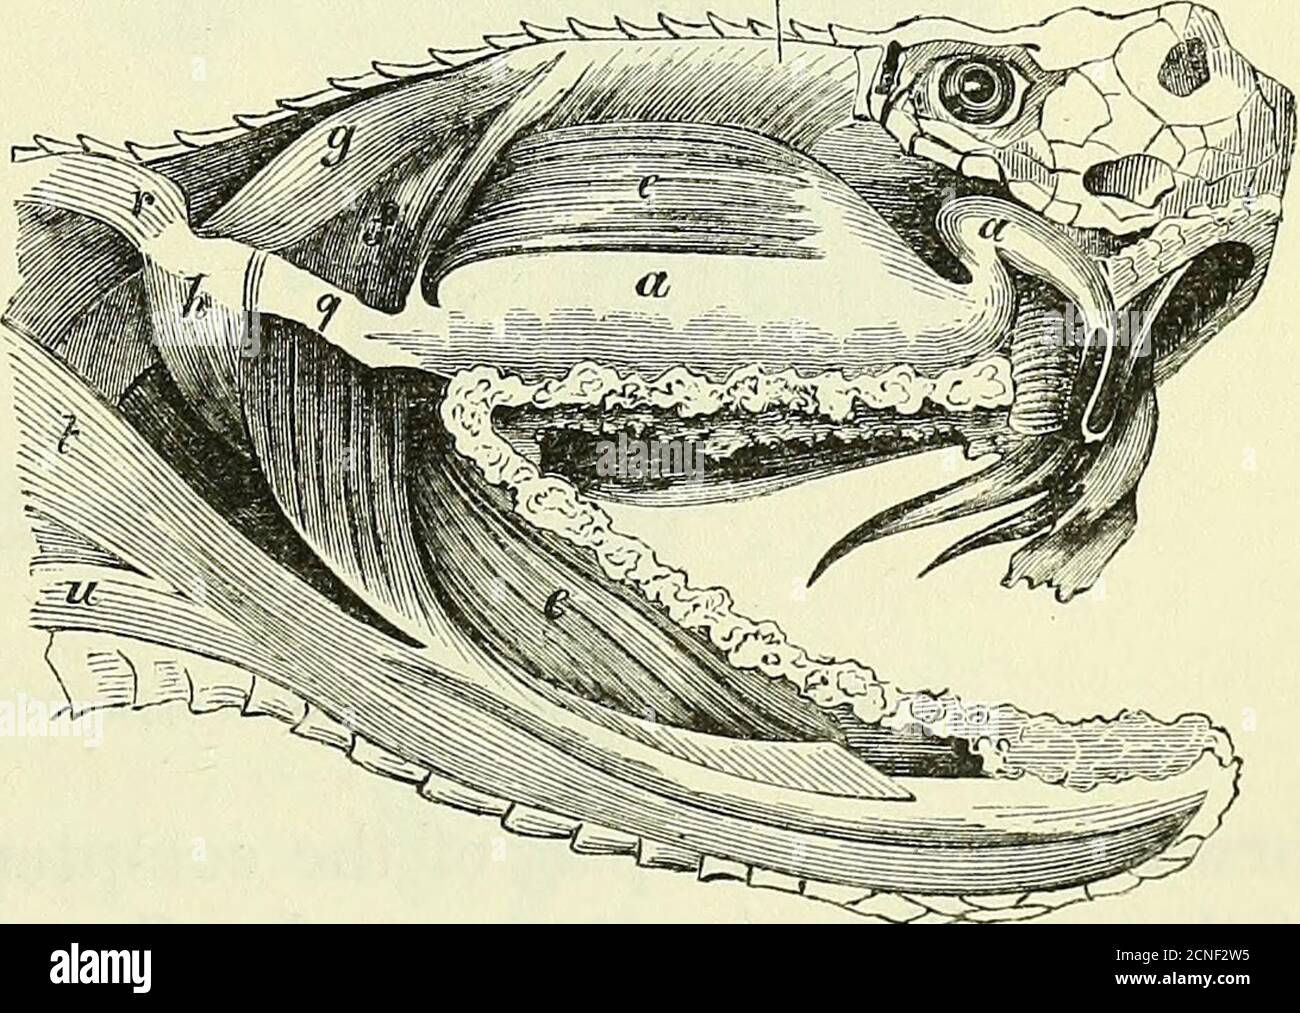 . On the anatomy of vertebrates [electronic resource] . ch close the mouth, one, like the muscle I,fig. 132, of the Shark, bears analogy to the masseter; in theabsence of a zygoma, it arises from the postfrontal and contiguouspart of the ectopterygoid, fig. 145, e, passes backward, windinground the tympano-mandibular joint, and is inserted into thesurangular and angular, as far forward as the dentary. Invenomous snakes its fascial origin spreads over the poison-bag,ib. a. The temporalis,ib. z, arises from theside and spine of theparietal, and descendsalmost vertically, partlycovered by the mas Stock Photo